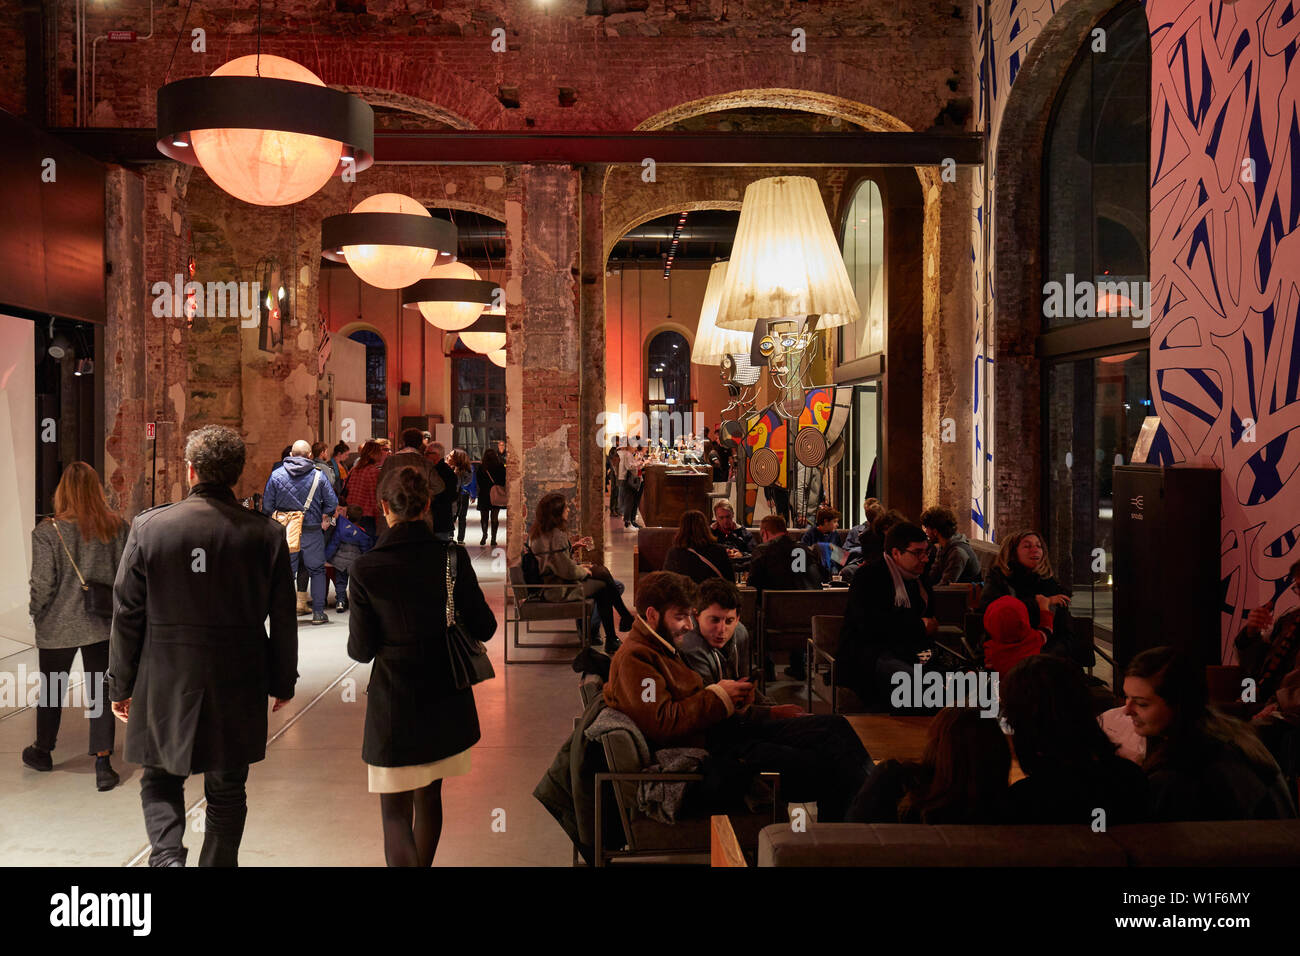 Ogr, Officine Grandi Riparazioni cafe interior with people, evening in Turin, Italy. Stock Photo